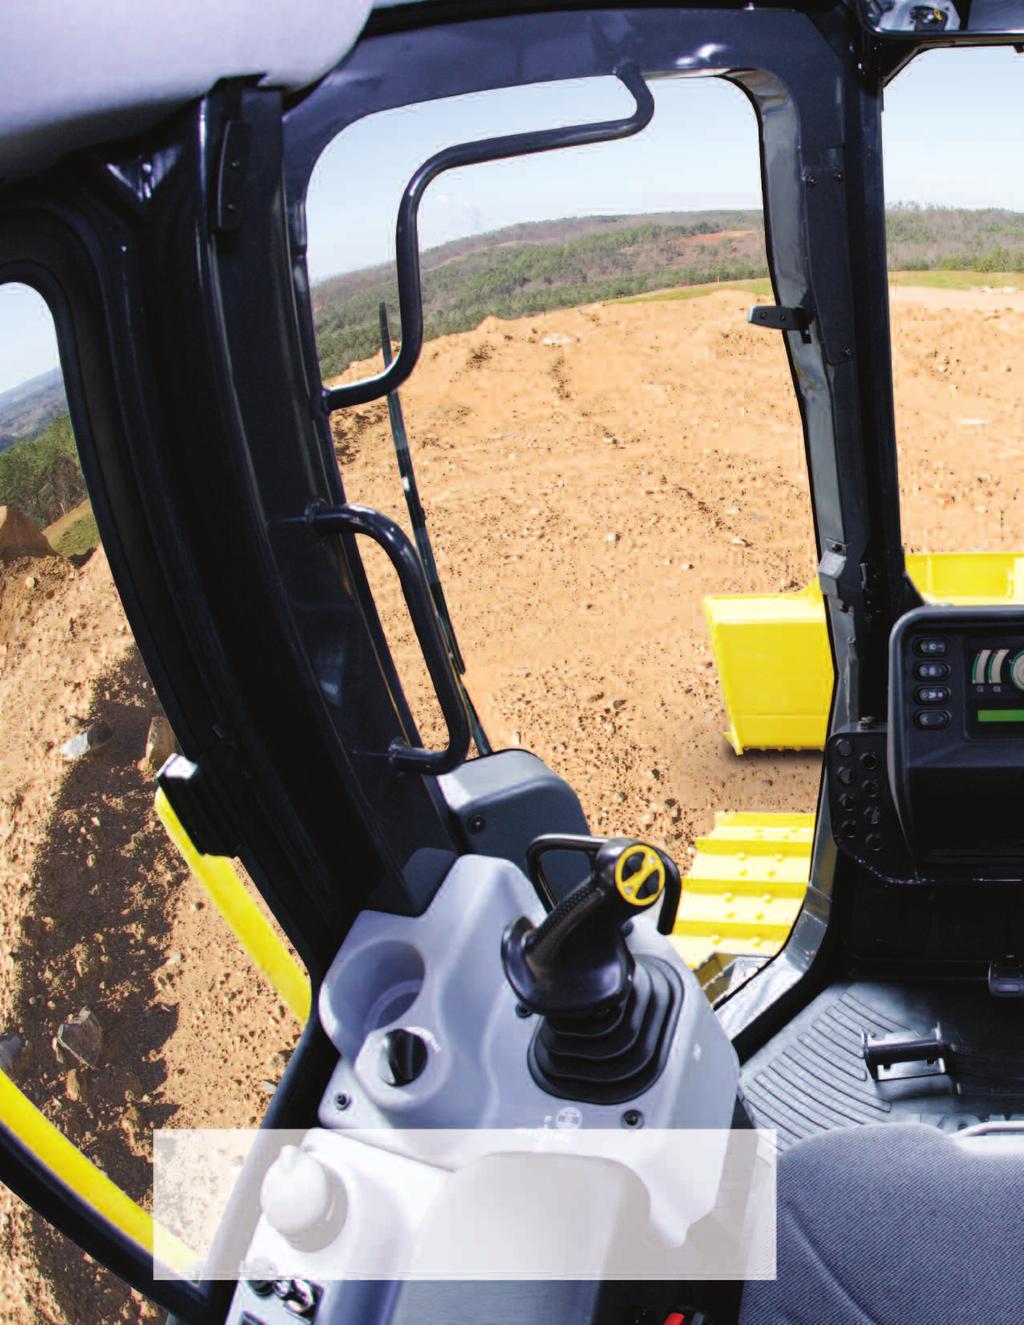 D37-22 C RAWLER D OZER Great visibility ru Unrivaled Blade Visibility Just like the D51EX/PX-22, the D37EX/PX-22 incorporates Komatsu s super-slant